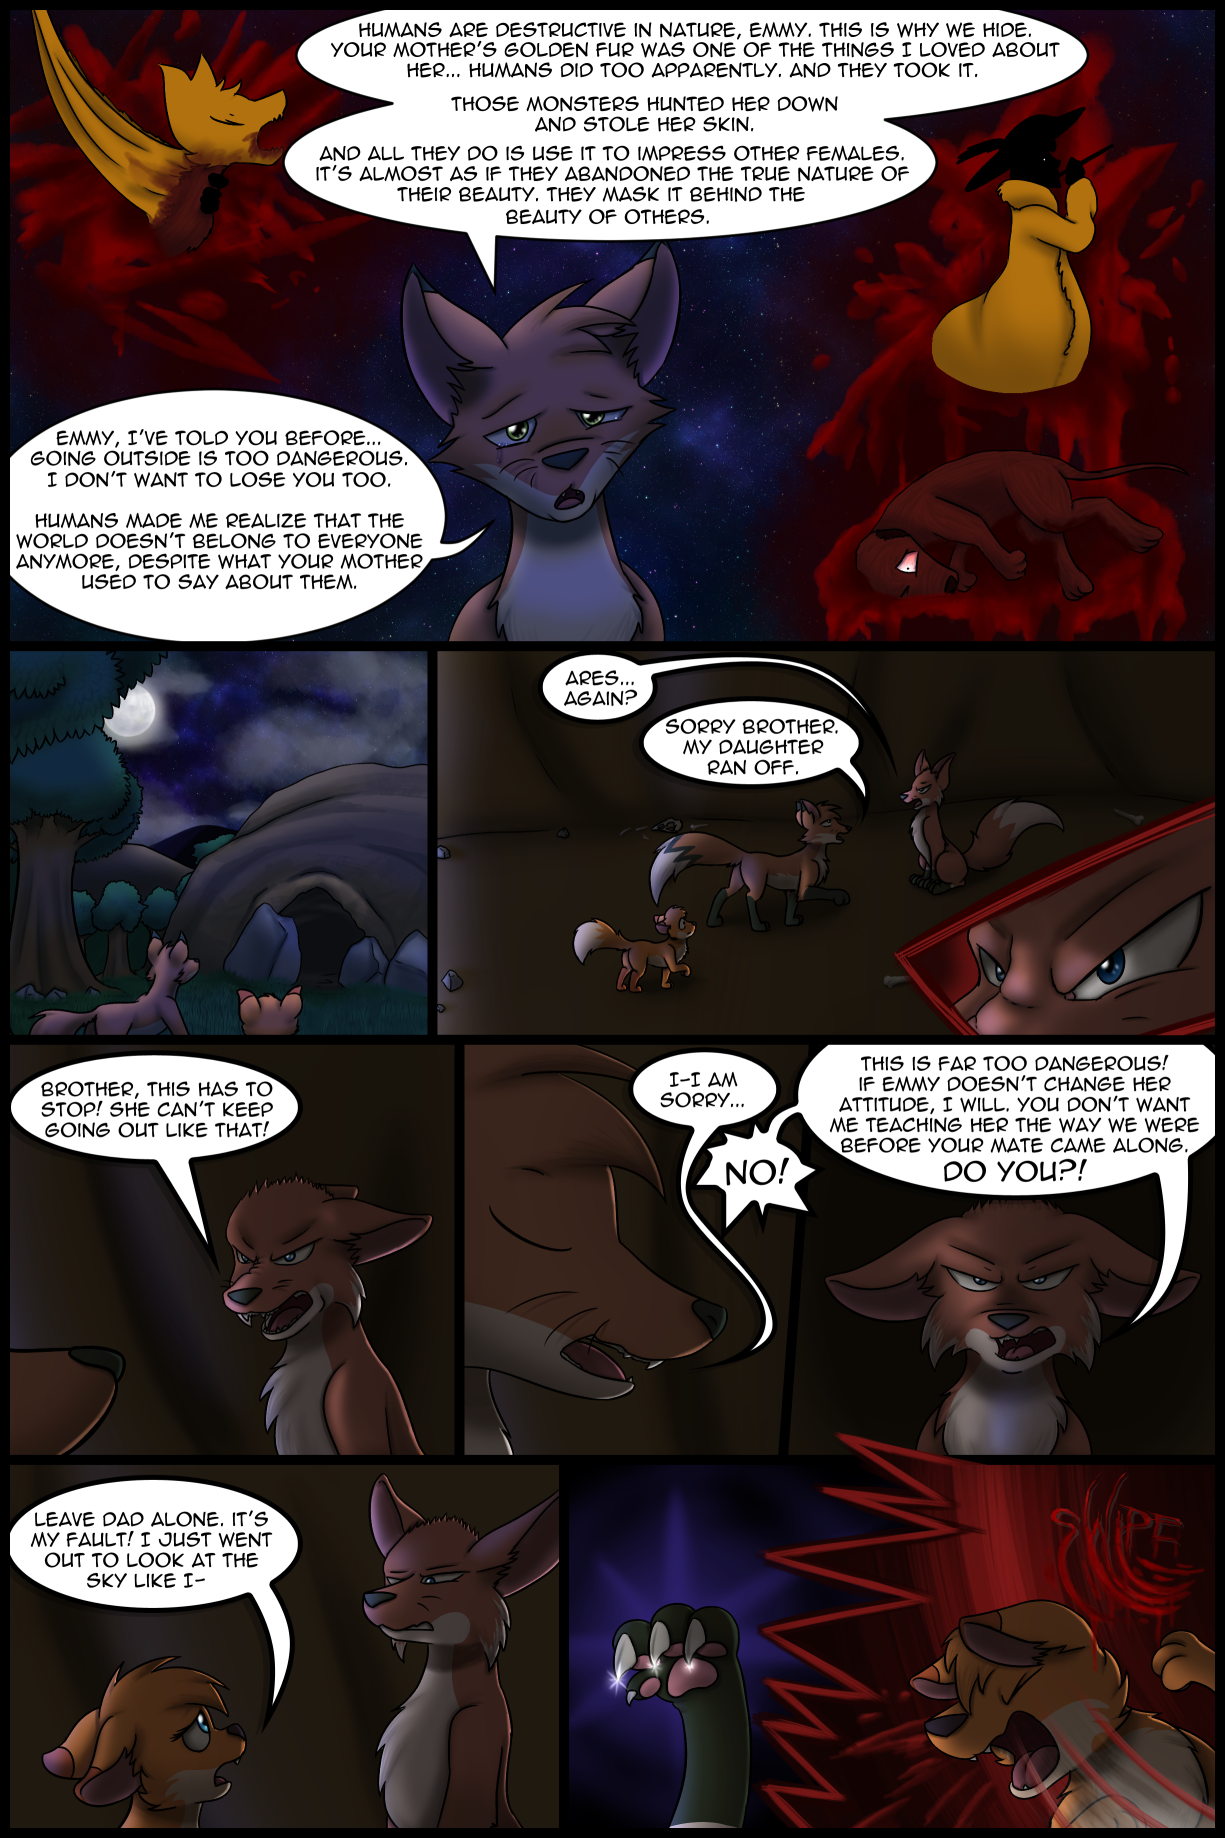 Ch1 Remastered Page 5-6 – The World is Cruel – Discipline